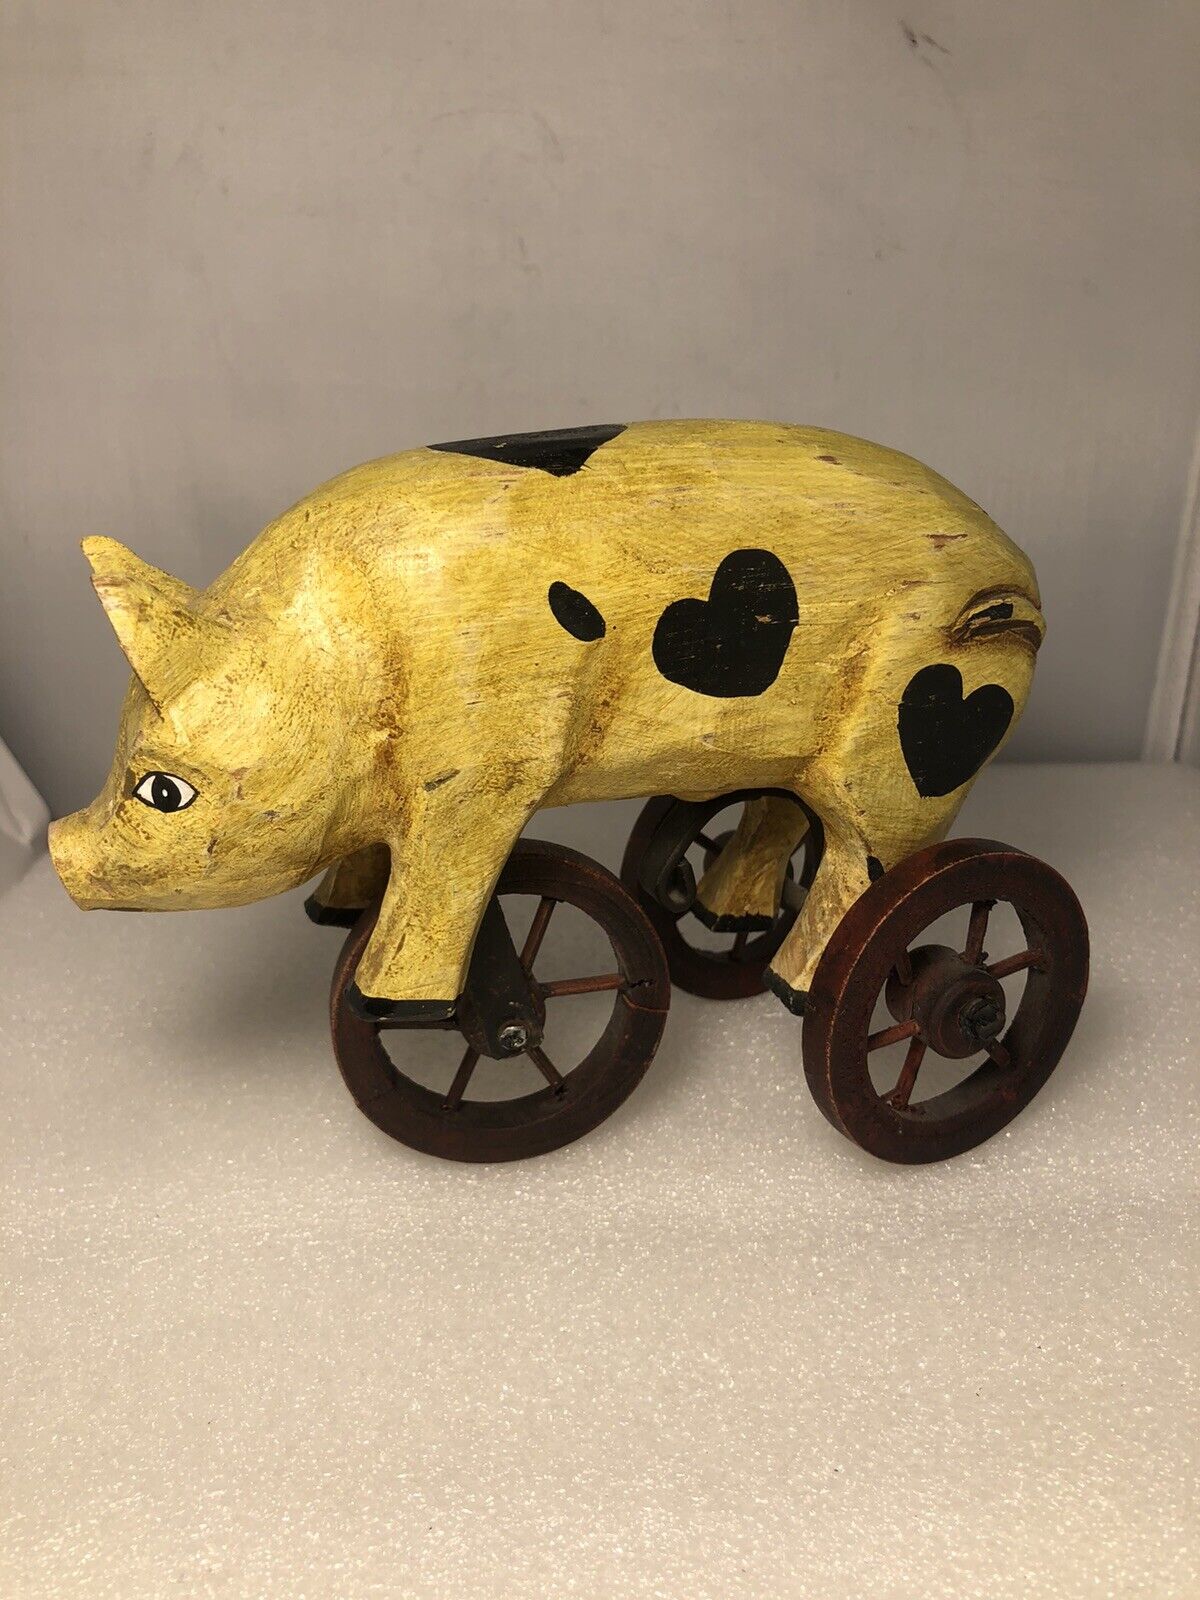 Folk Art Wooden Carved Pig on 3 Wheels Figurine Primitive Eclectic RaRe Toy